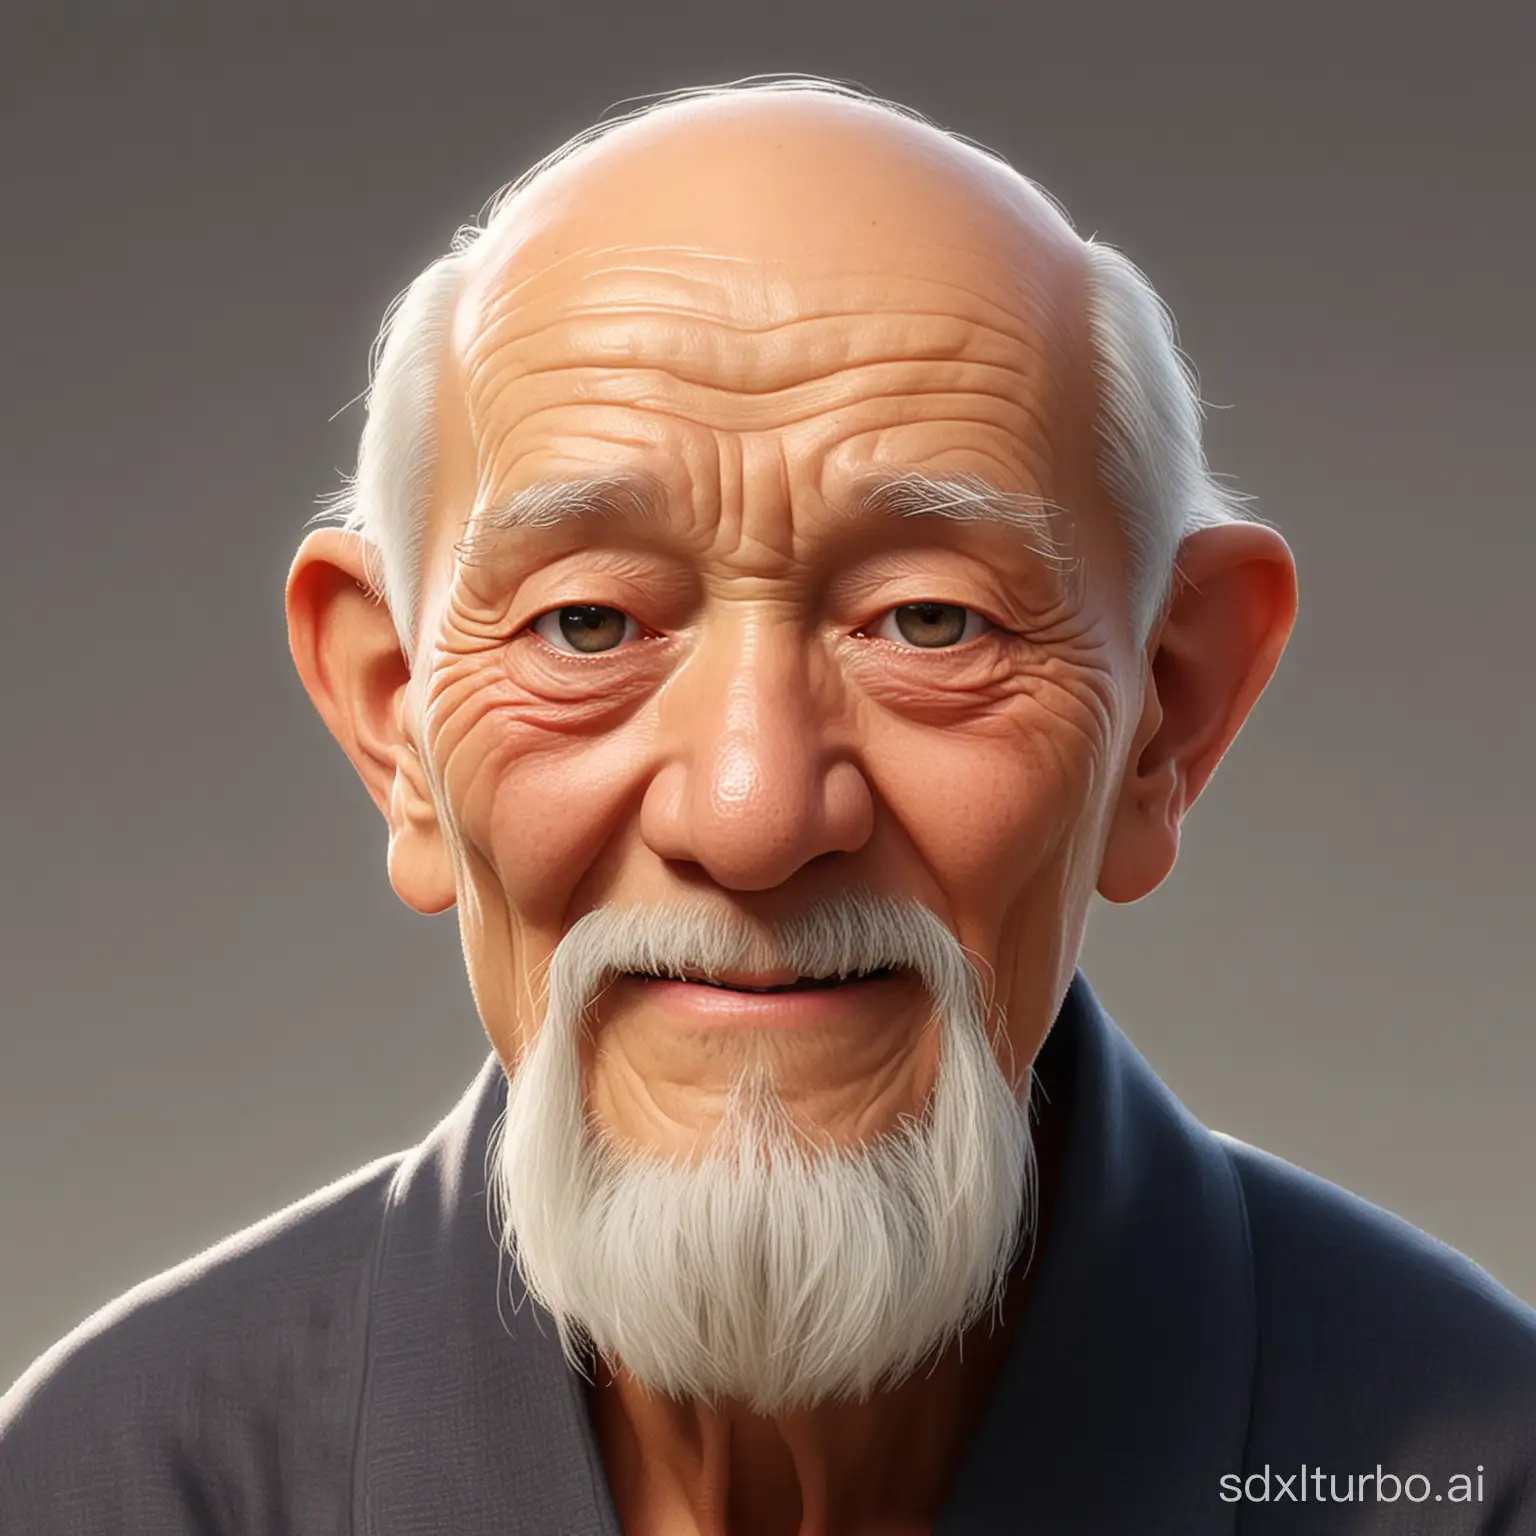 Animated-Cartoon-of-a-Wise-Elderly-Chinese-Man-Engaging-in-Conversation